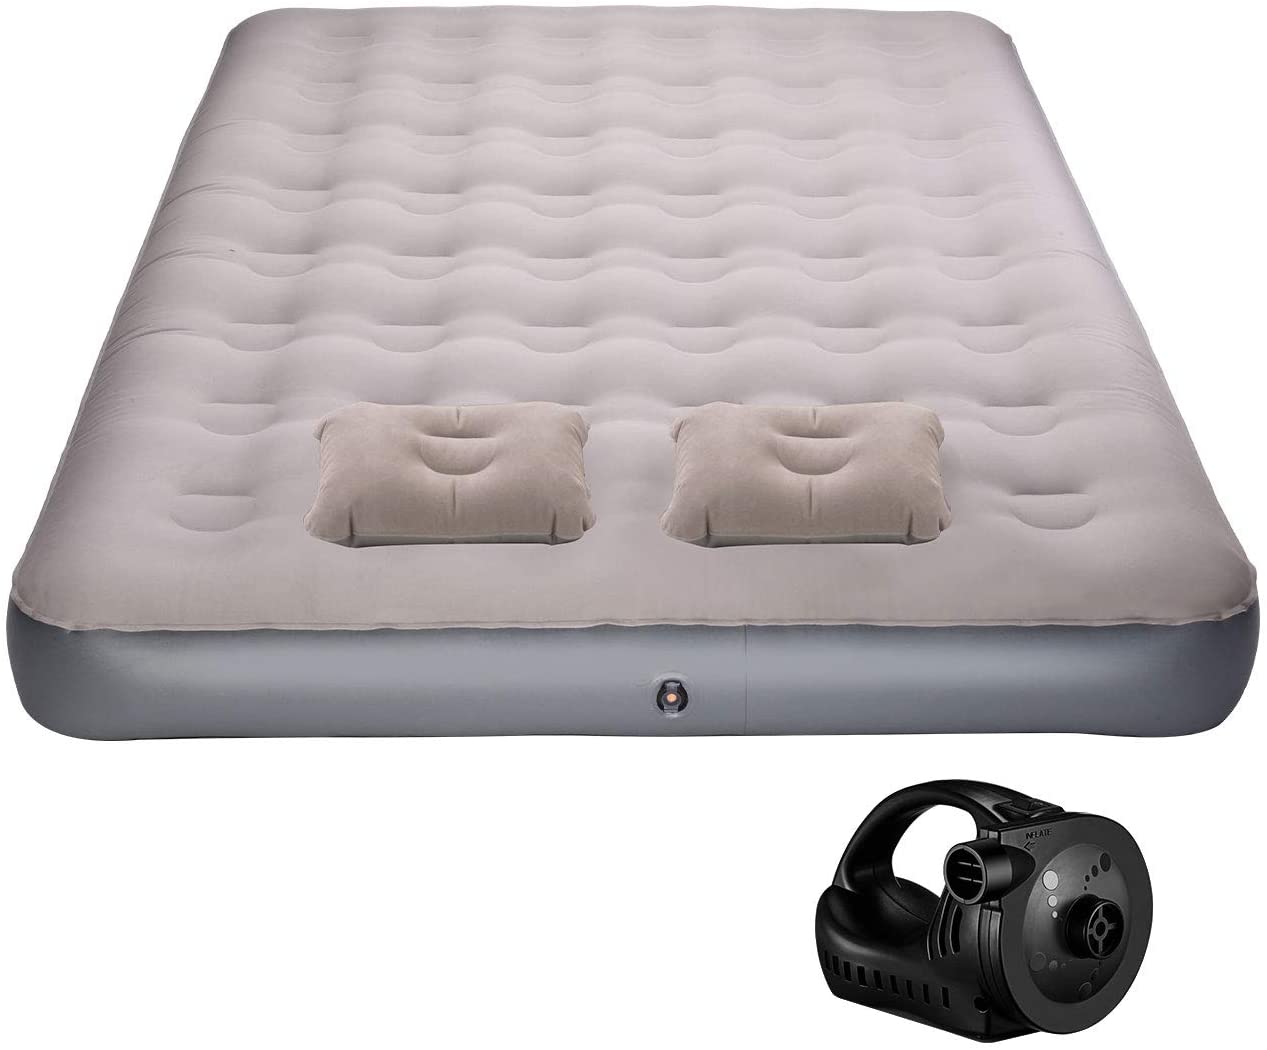 Inflatable Air Bed Mattress with Rechargeable Electric Pump, Queen Size $36.97 at Walmart